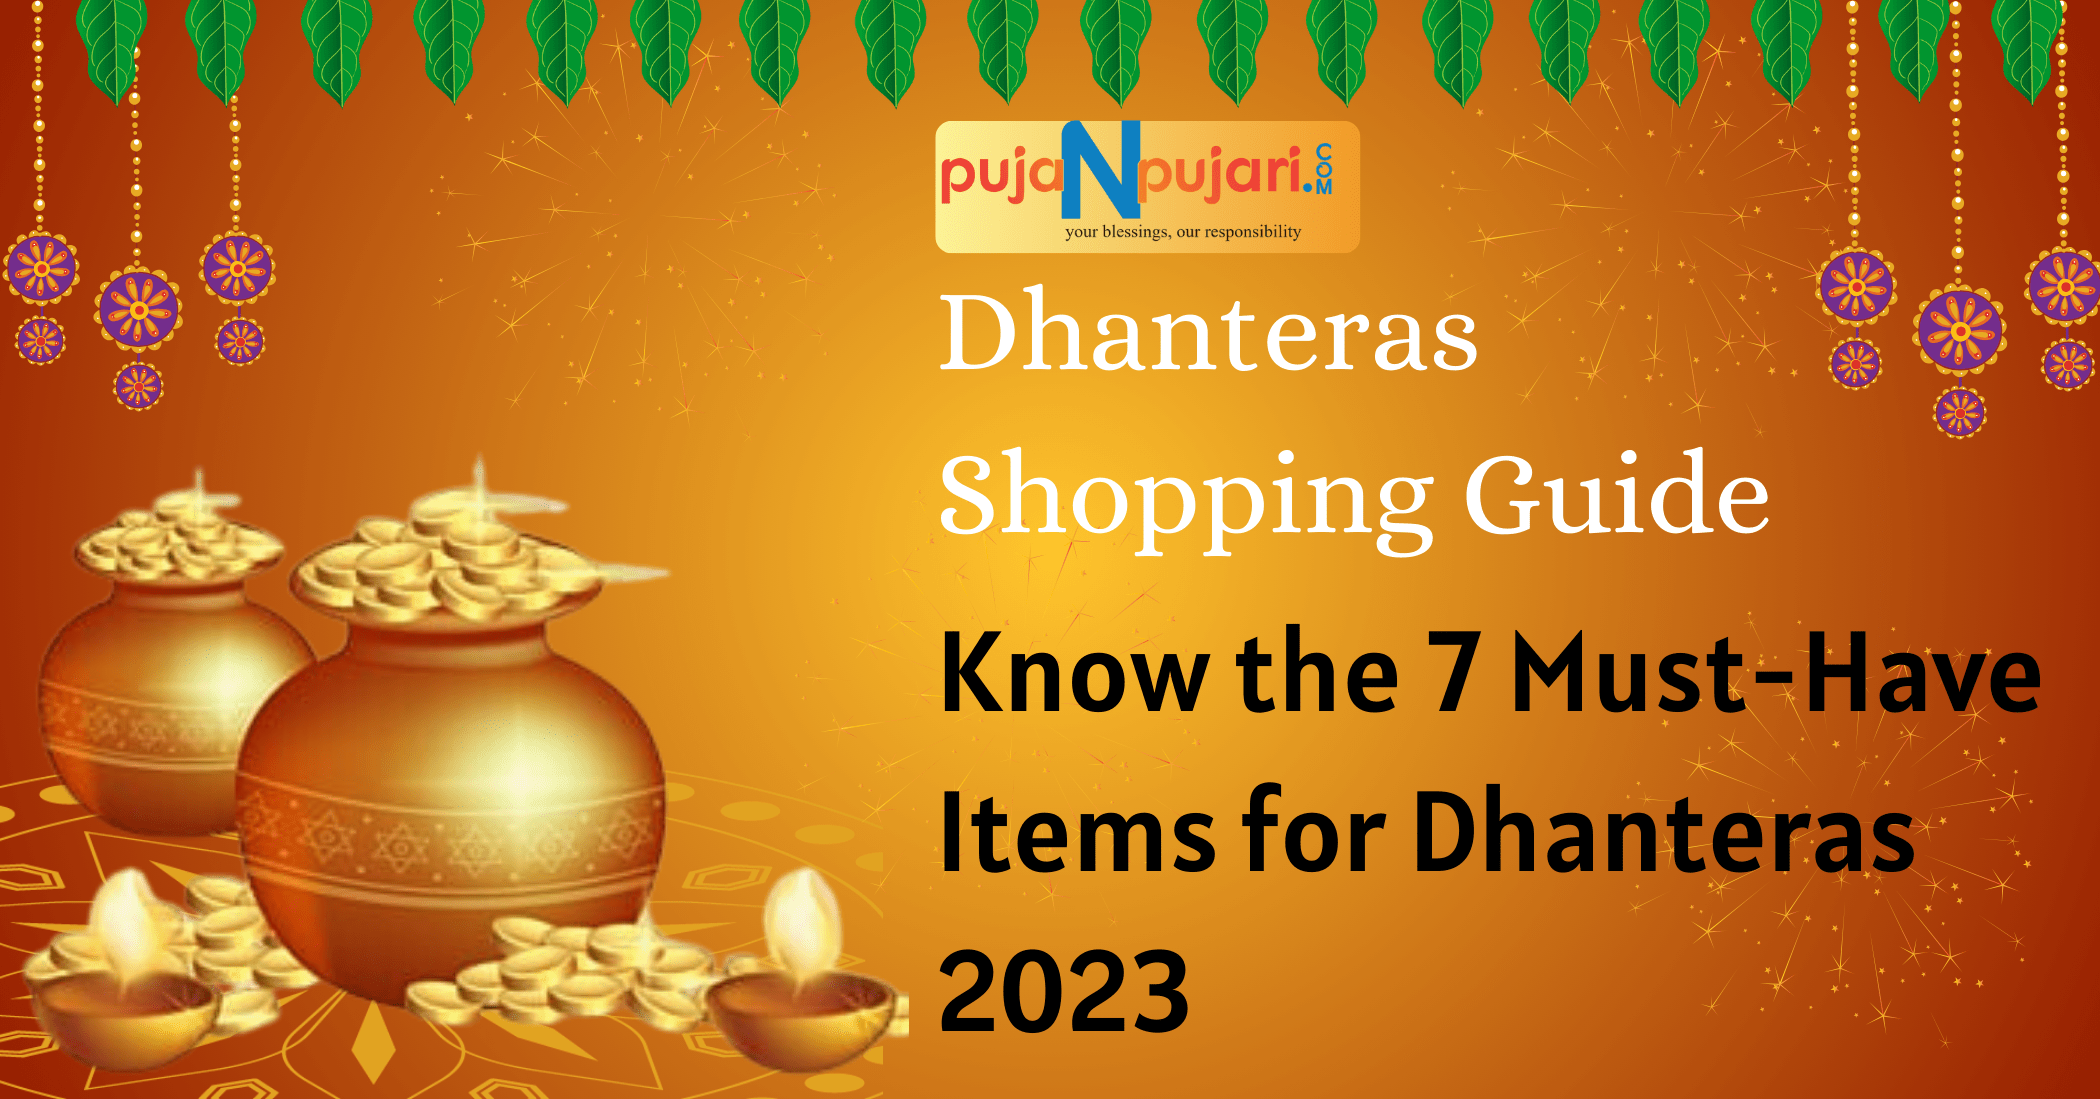 Know the 7 Must-Have Items for Dhanteras 2023: Dhanteras Shopping Guide